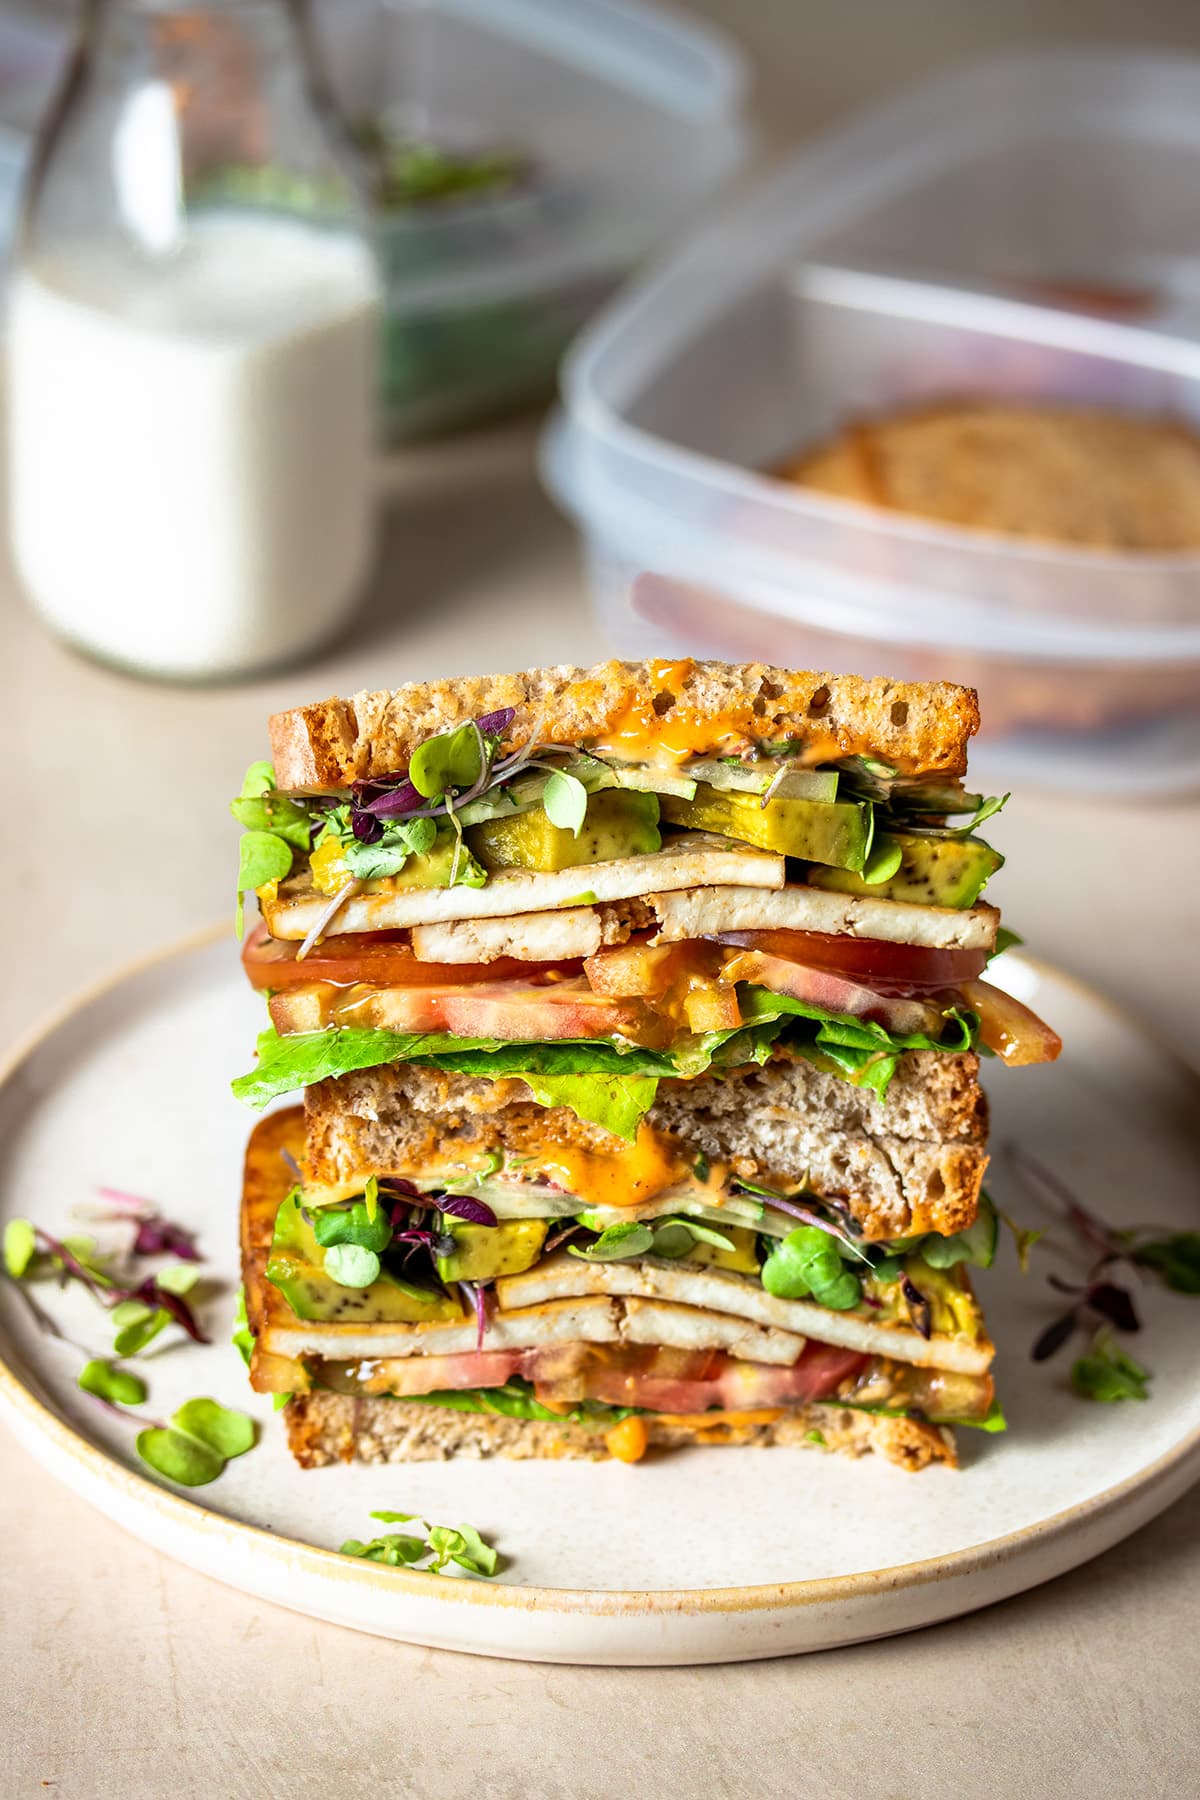 A stacked tofu and veggie sandwich that has been cut in half sitting on a plate with a glass of milk and plastic containers behind it.